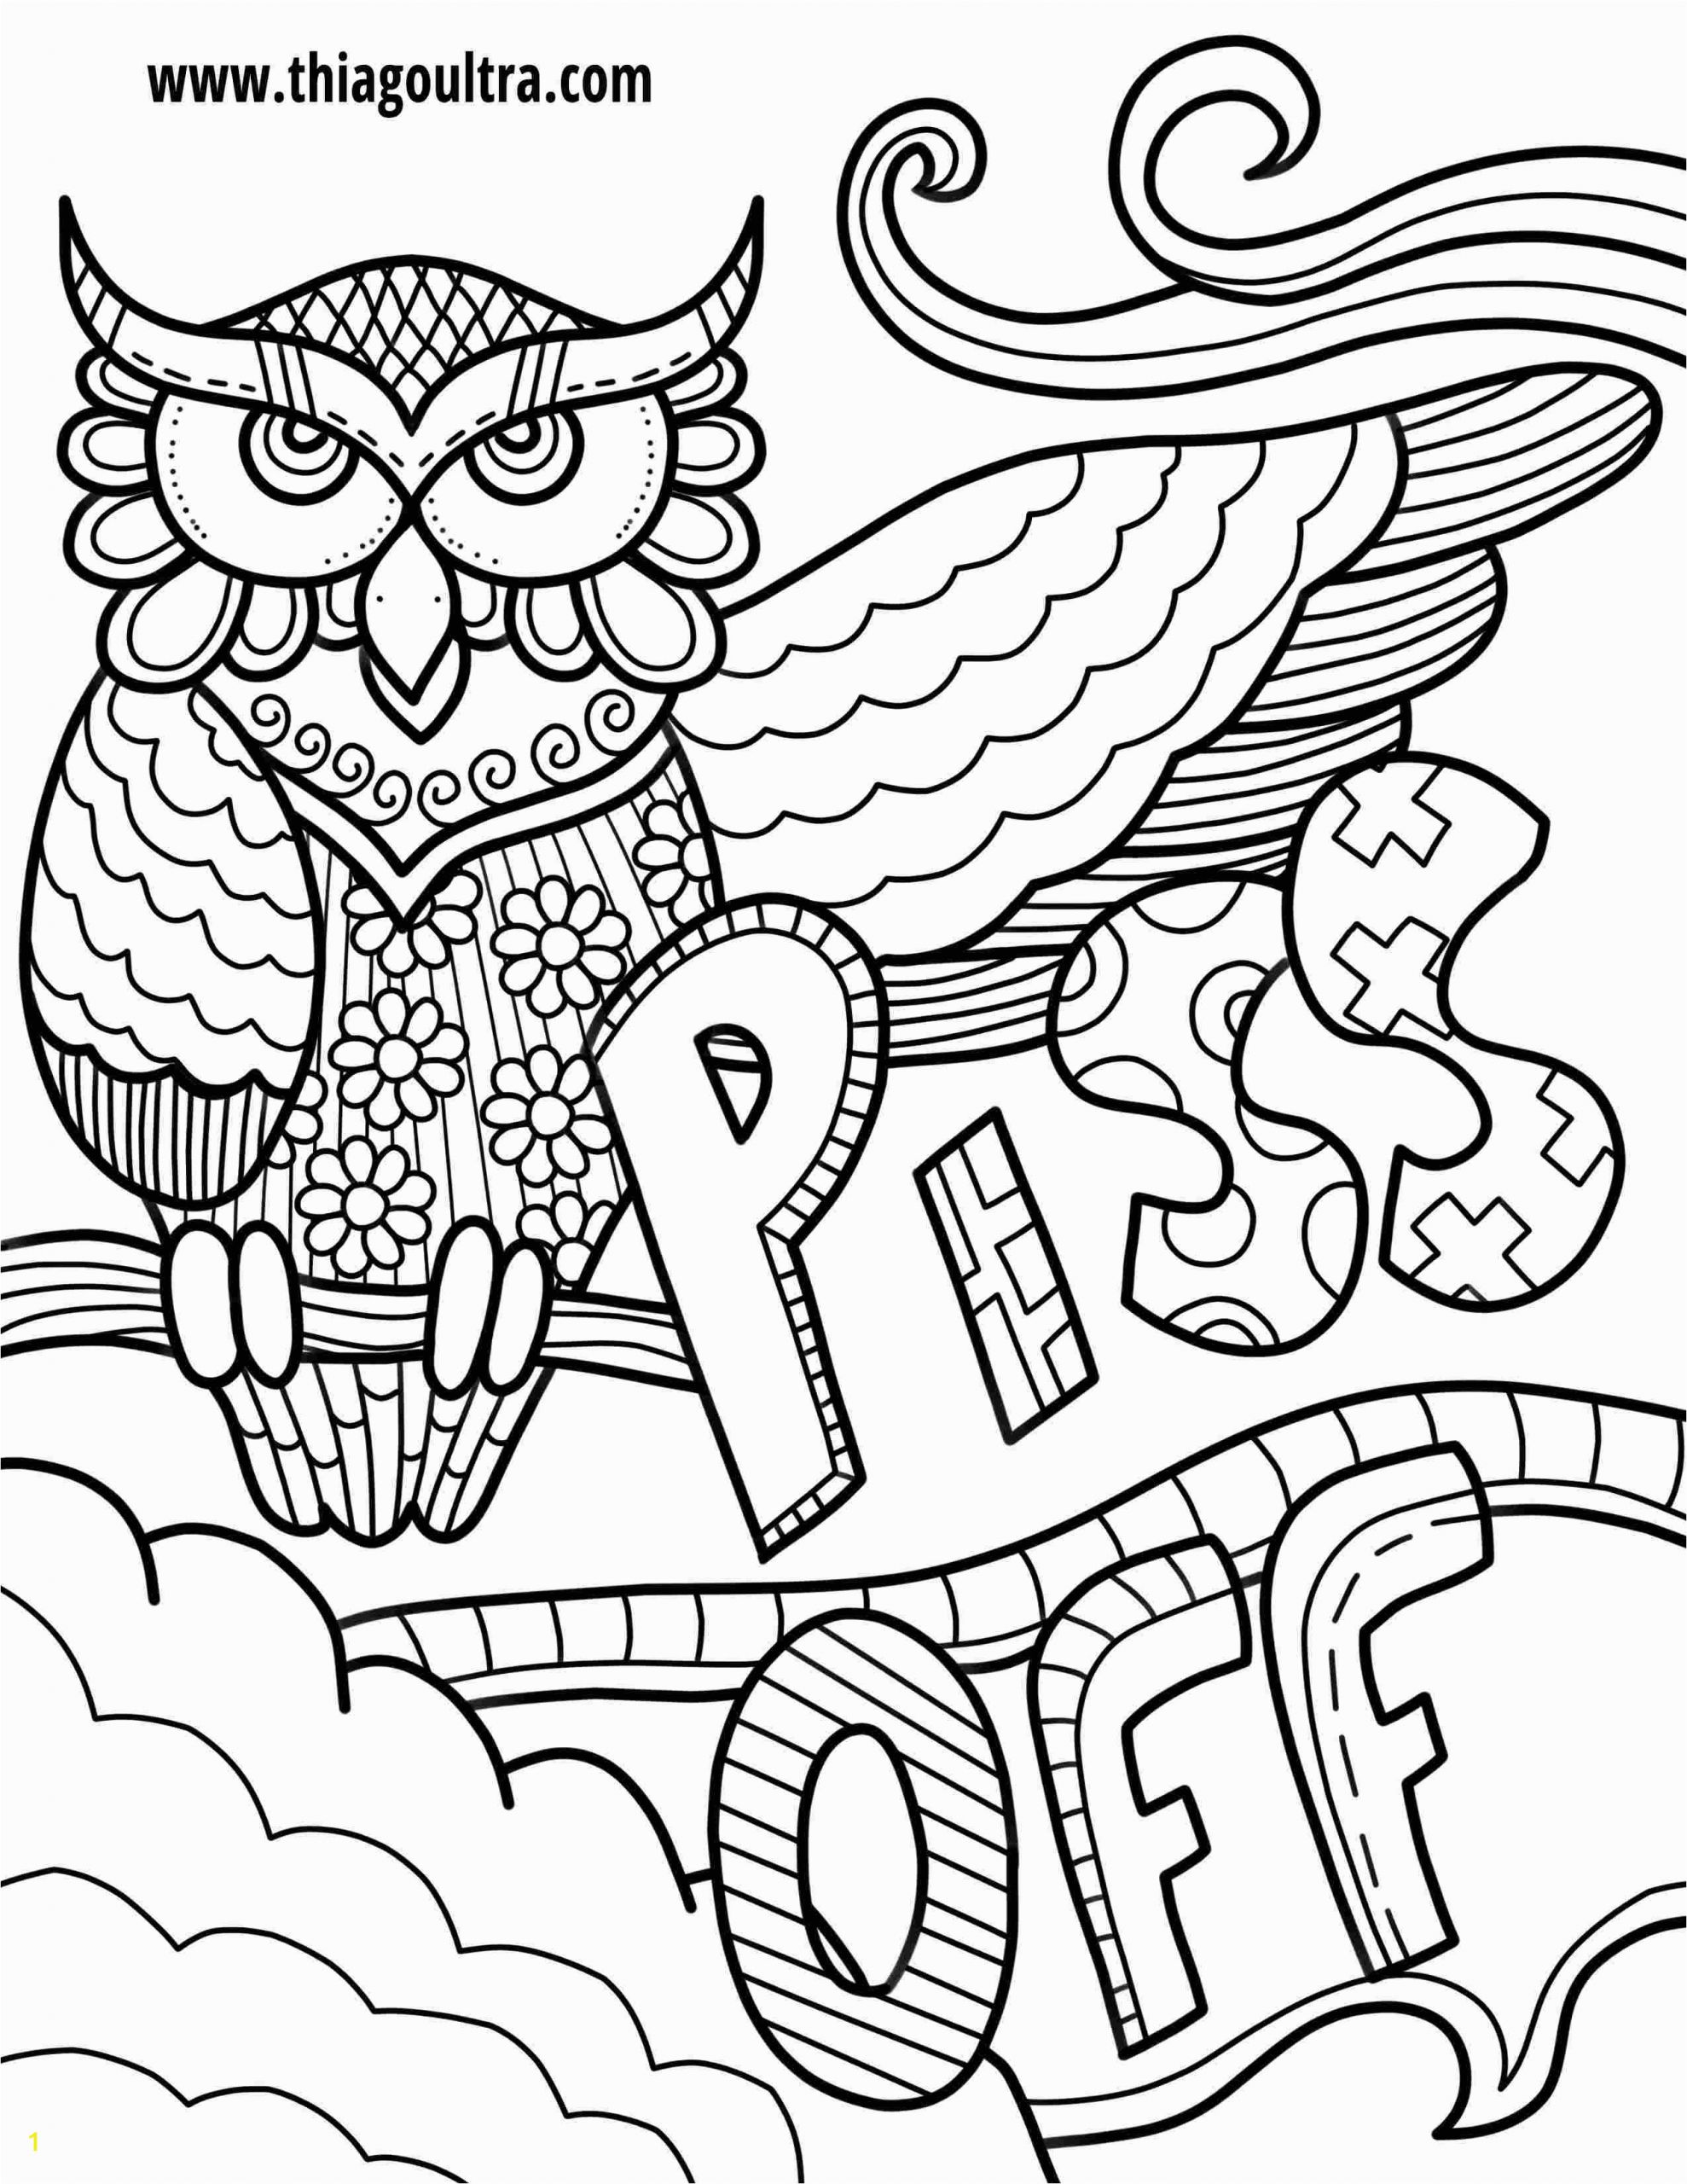 Free Printable Coloring Pages for Adults Only Swear Words ...